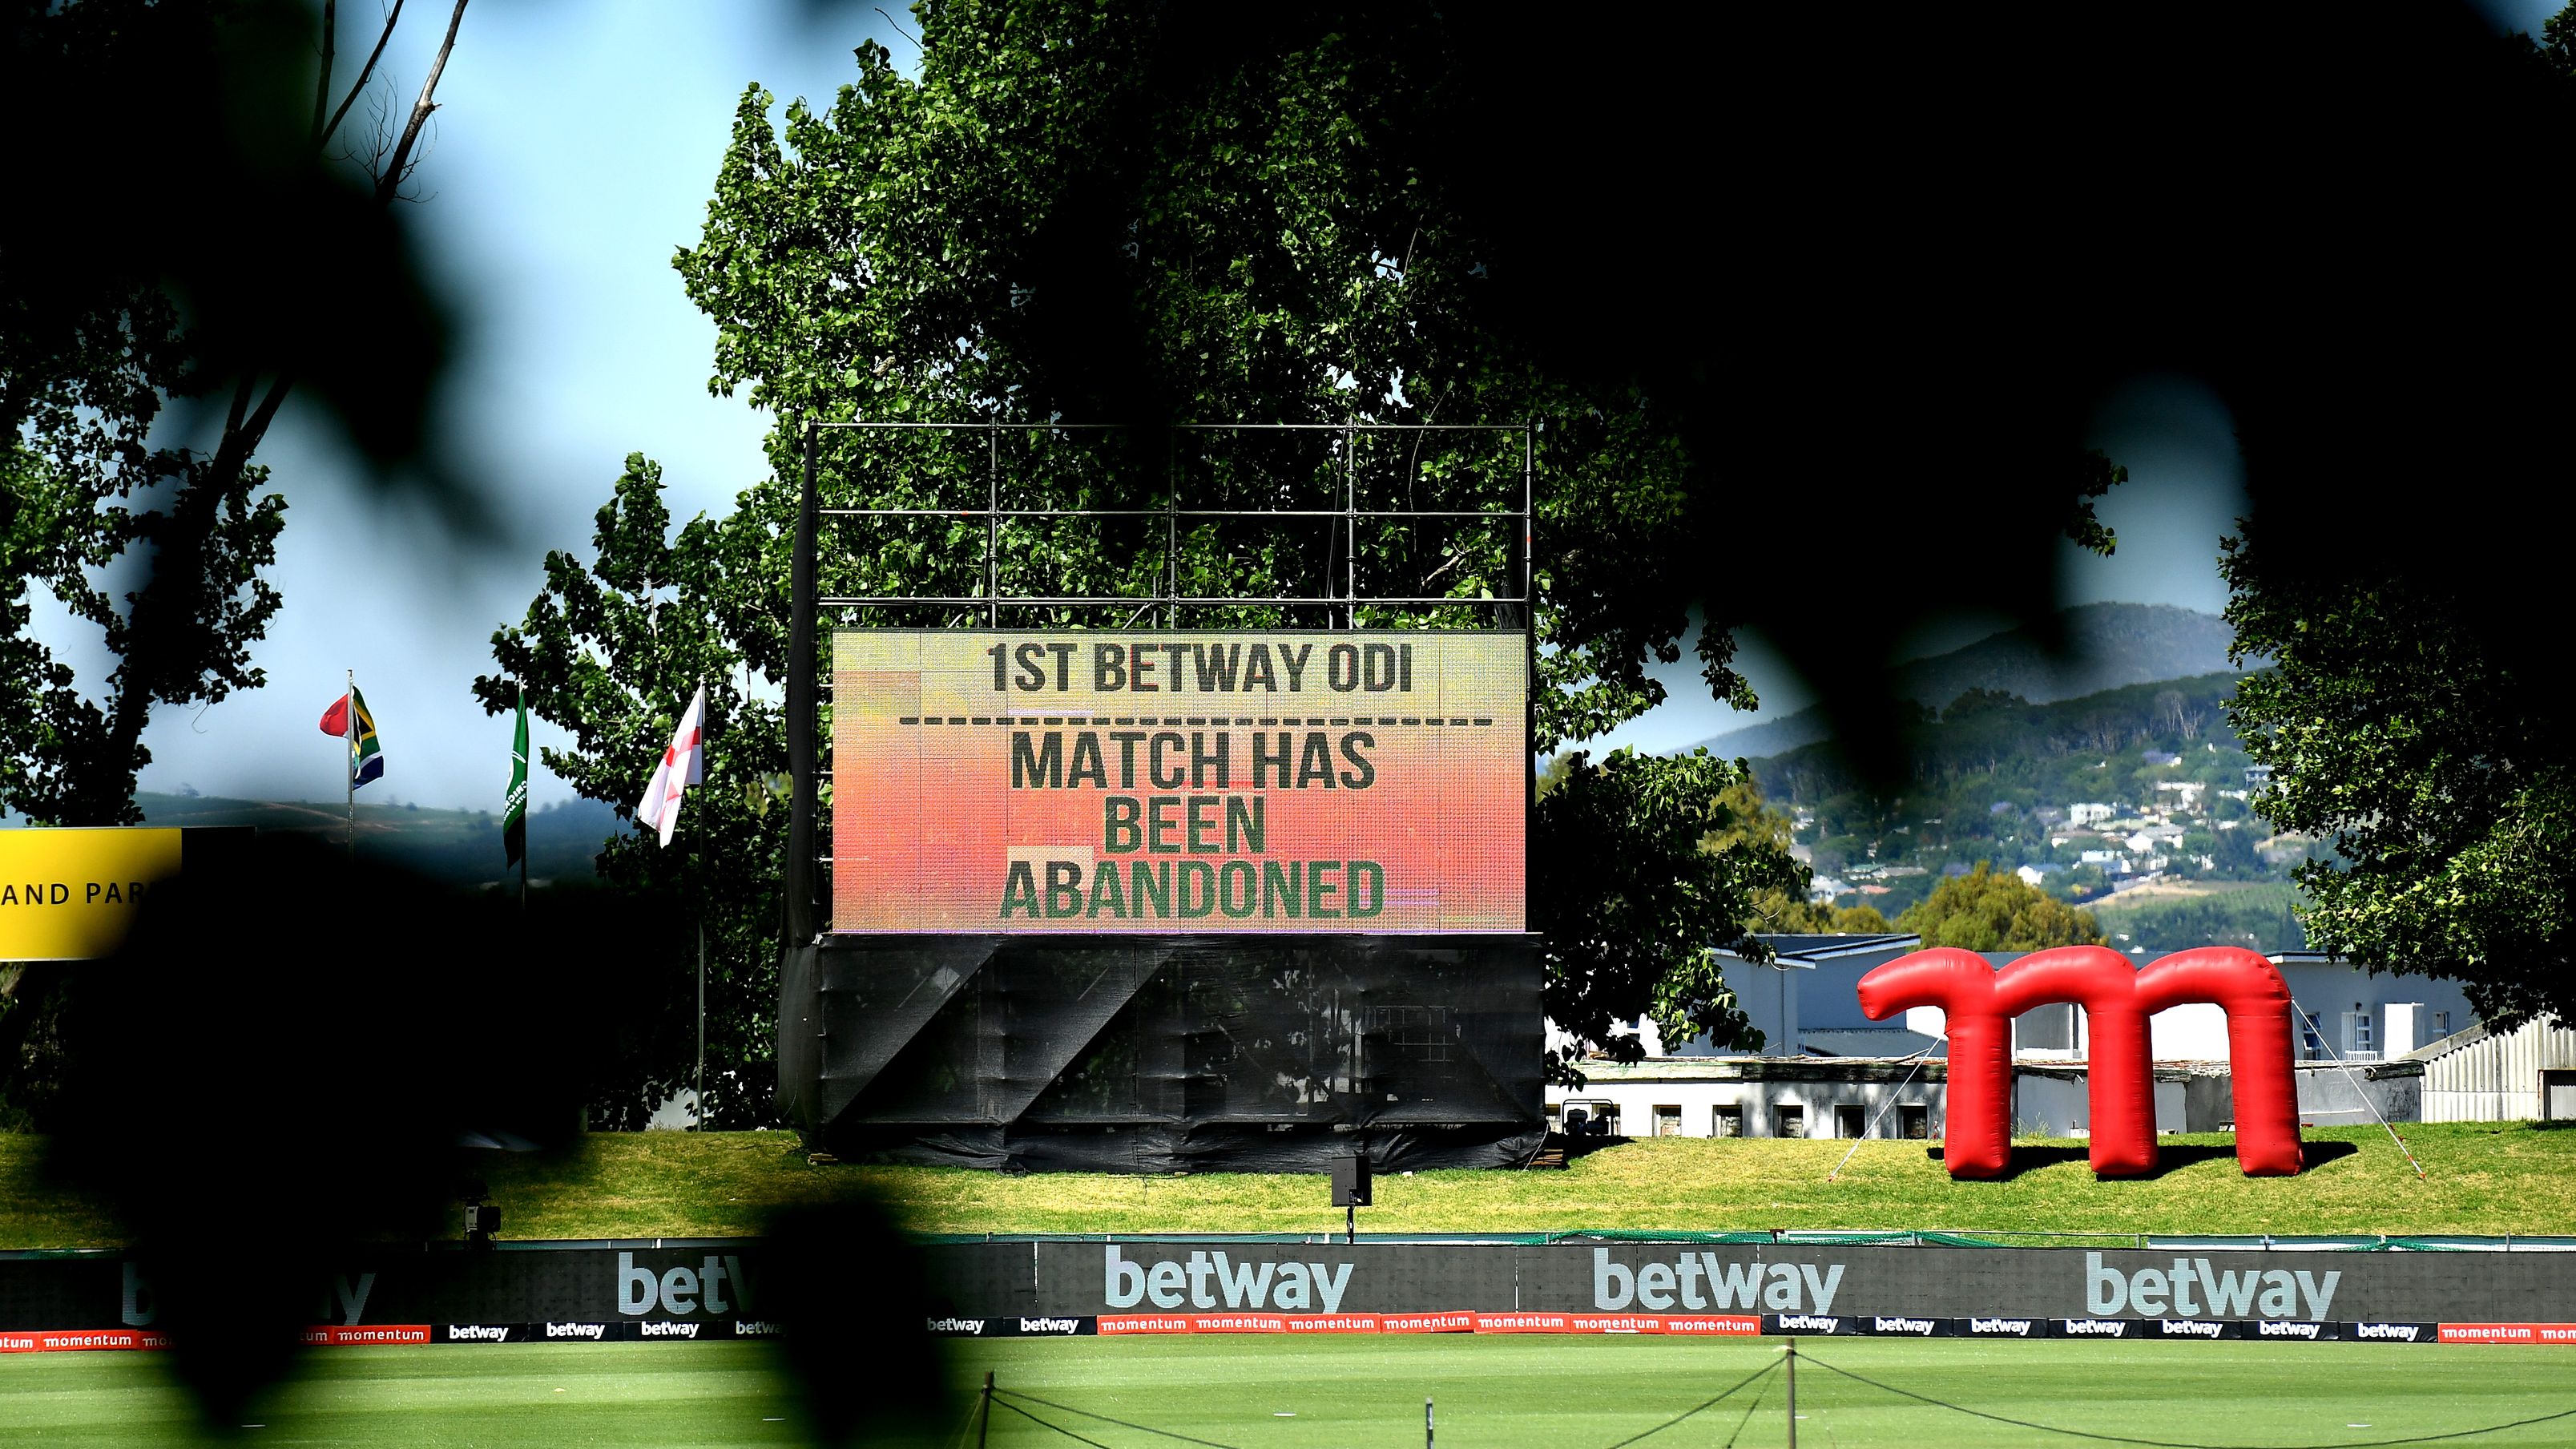 The South Africa v England ODI has been abandoned.